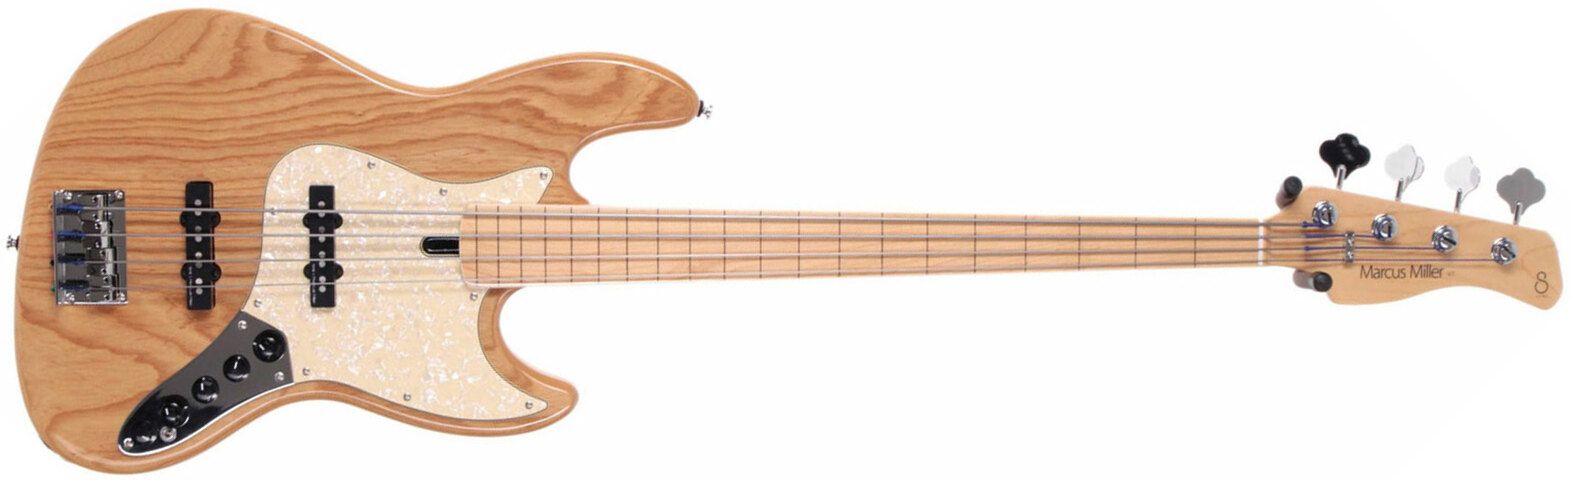 Marcus Miller V7 Swamp Ash Fretless 4st 2nd Generation Active Mn - Natural - Solidbody E-bass - Main picture